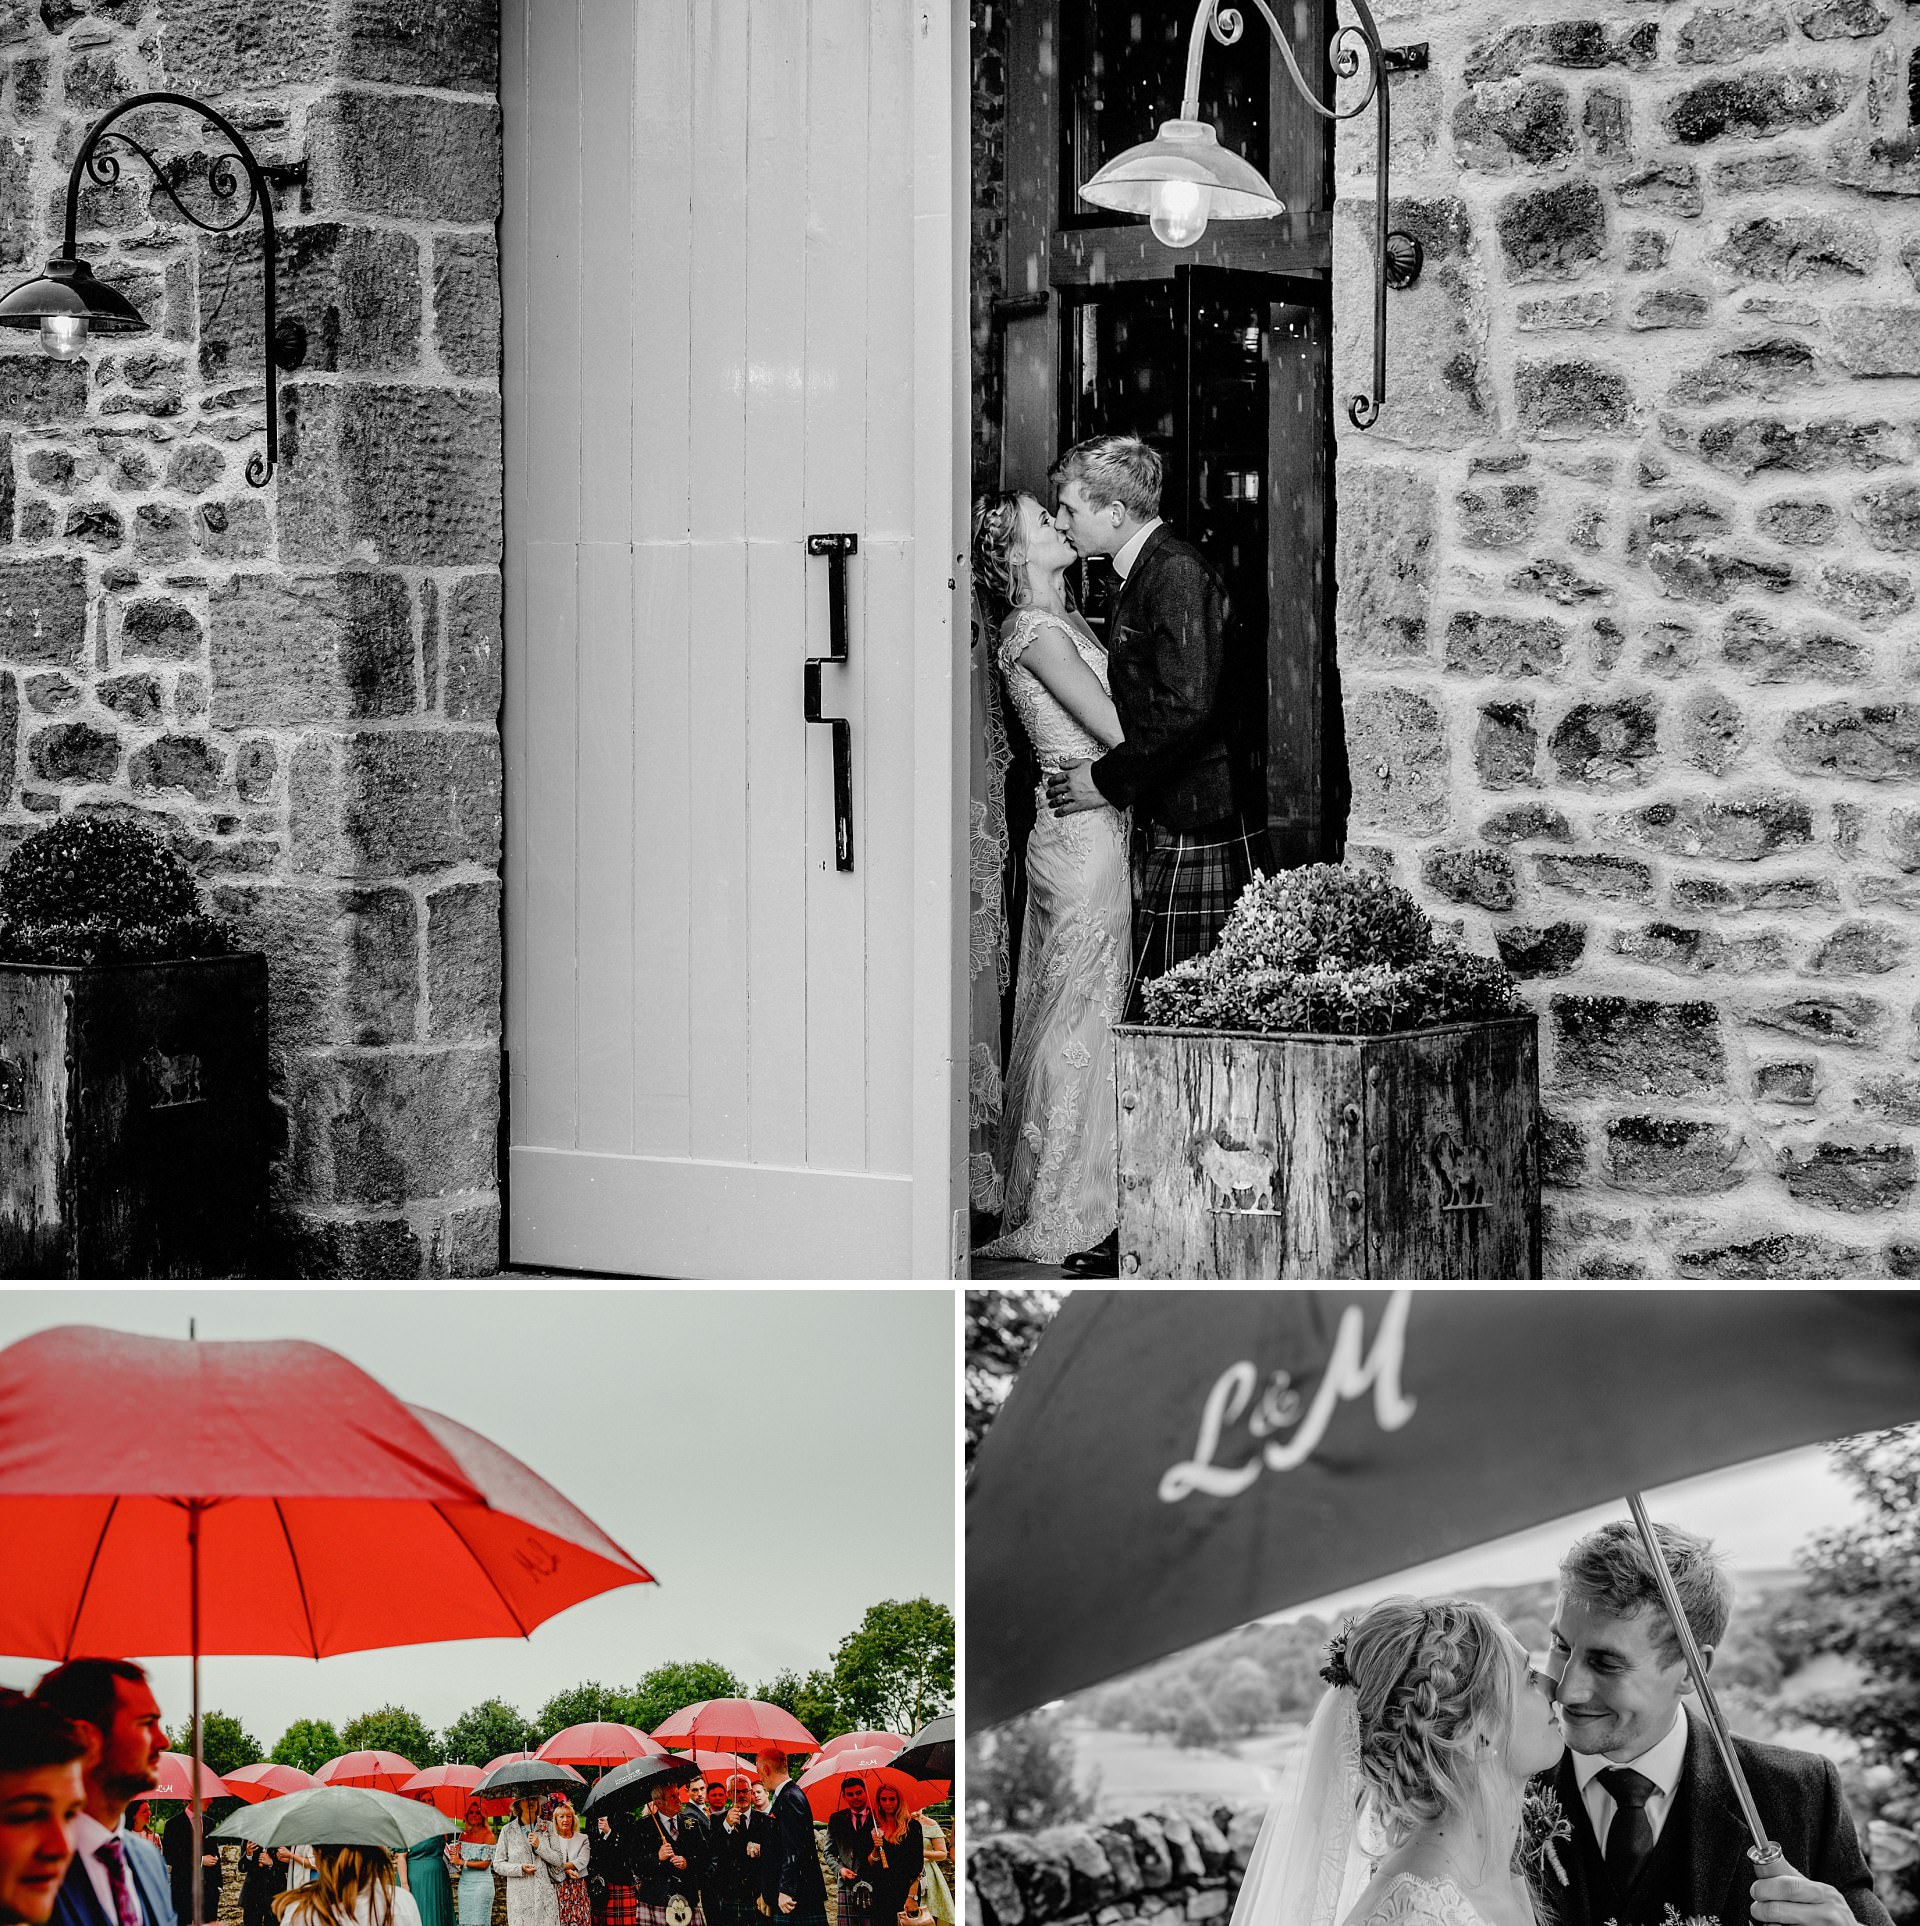 photos of a rainy day at bolton abbey, north yorkshire